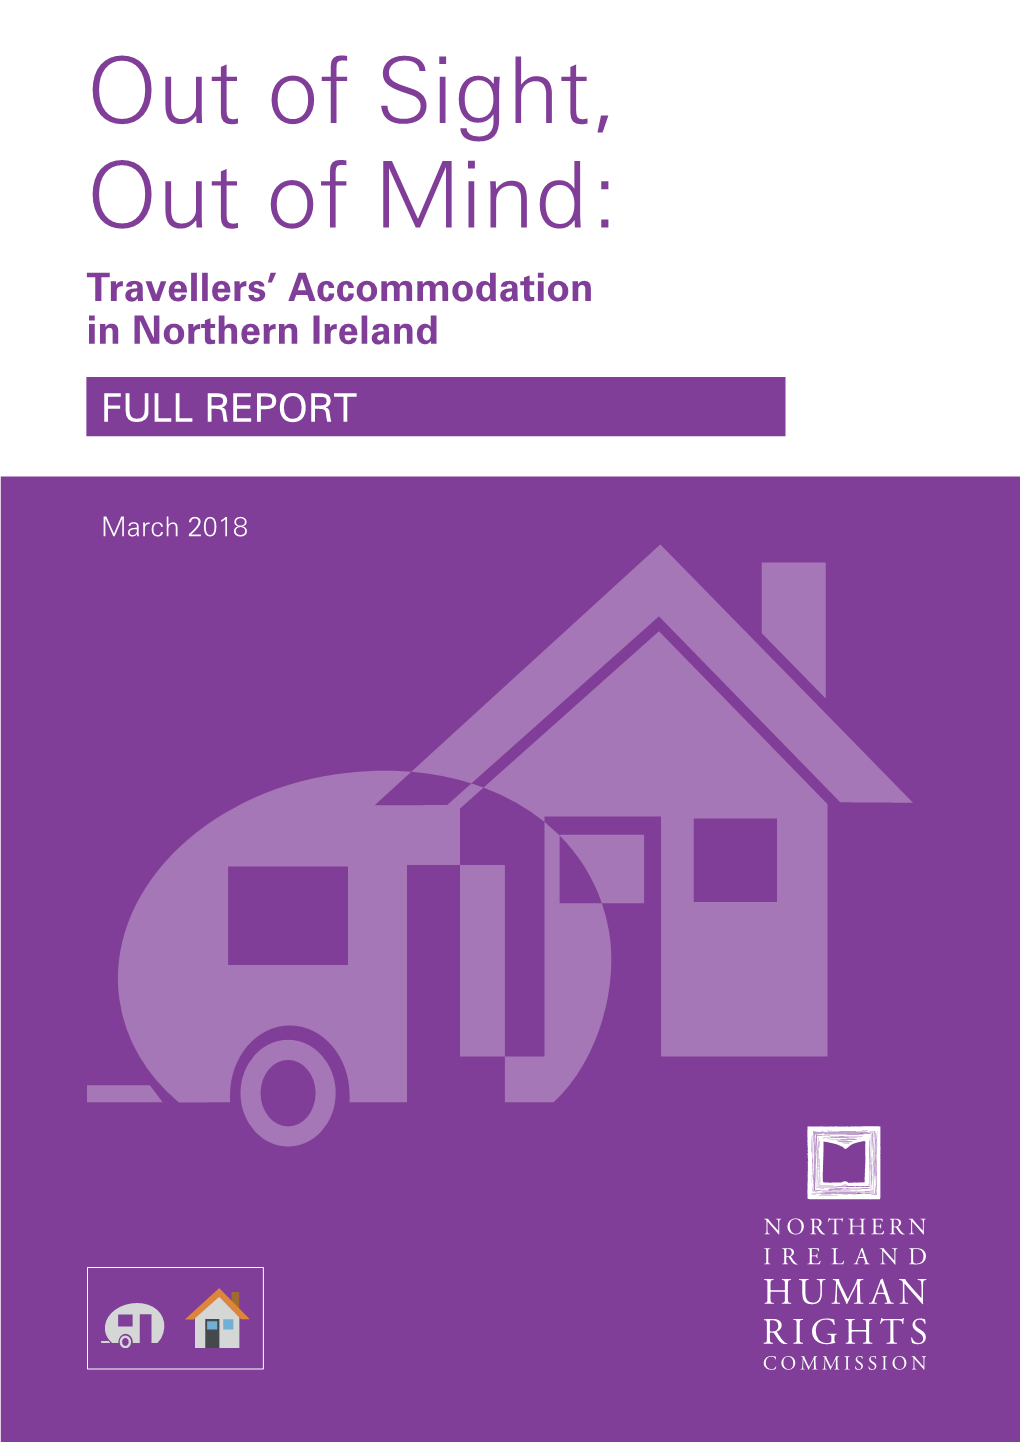 Out of Sight, out of Mind: Full Report Travellers' Accommodation In